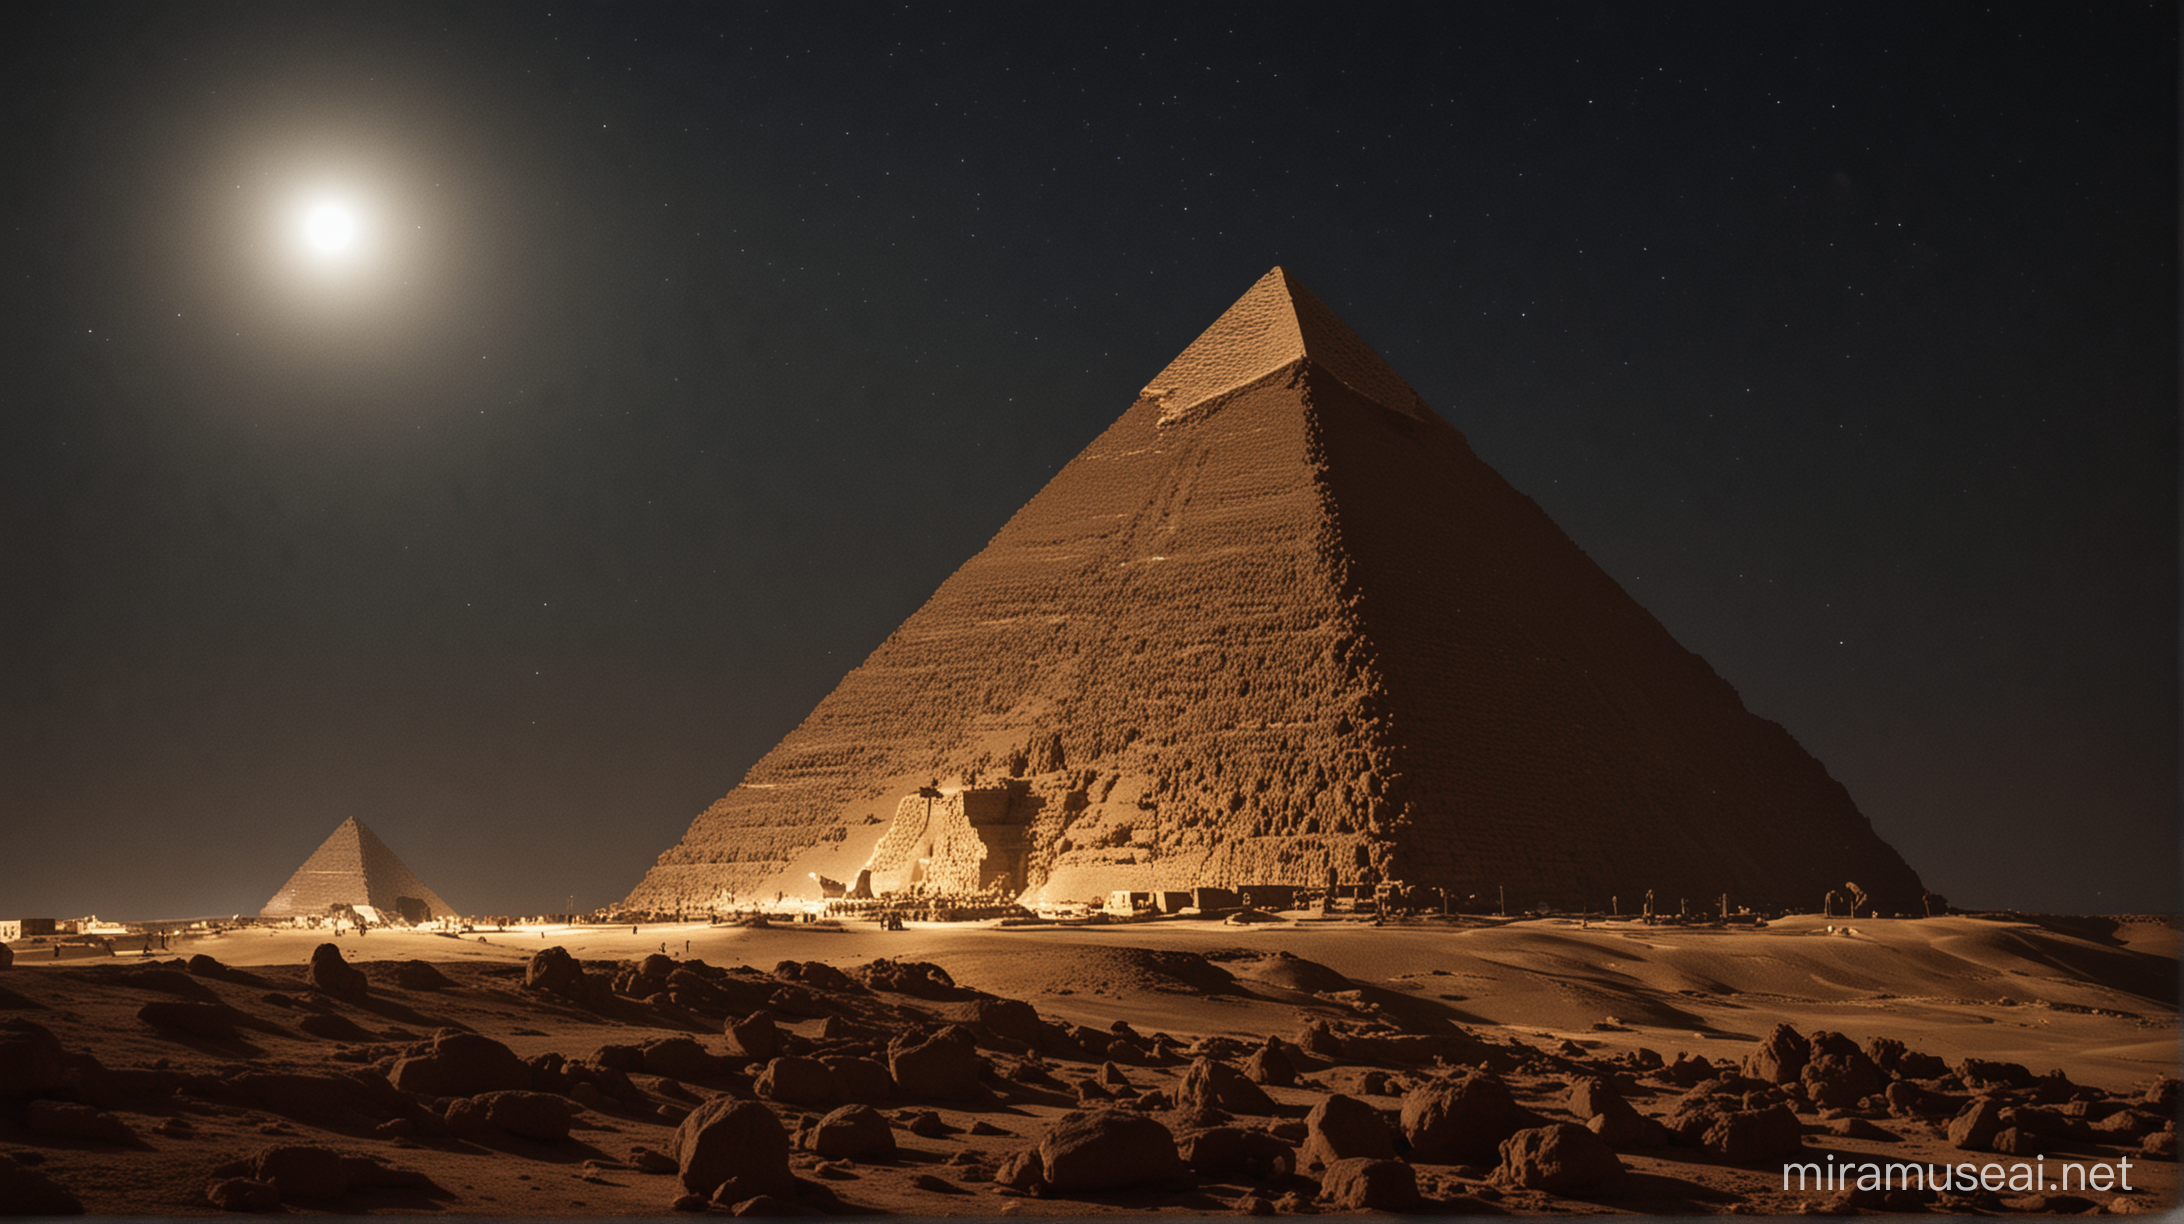 the pyramid of cheops at night in the moonlight. an alien spaceship lands next to the pyramid